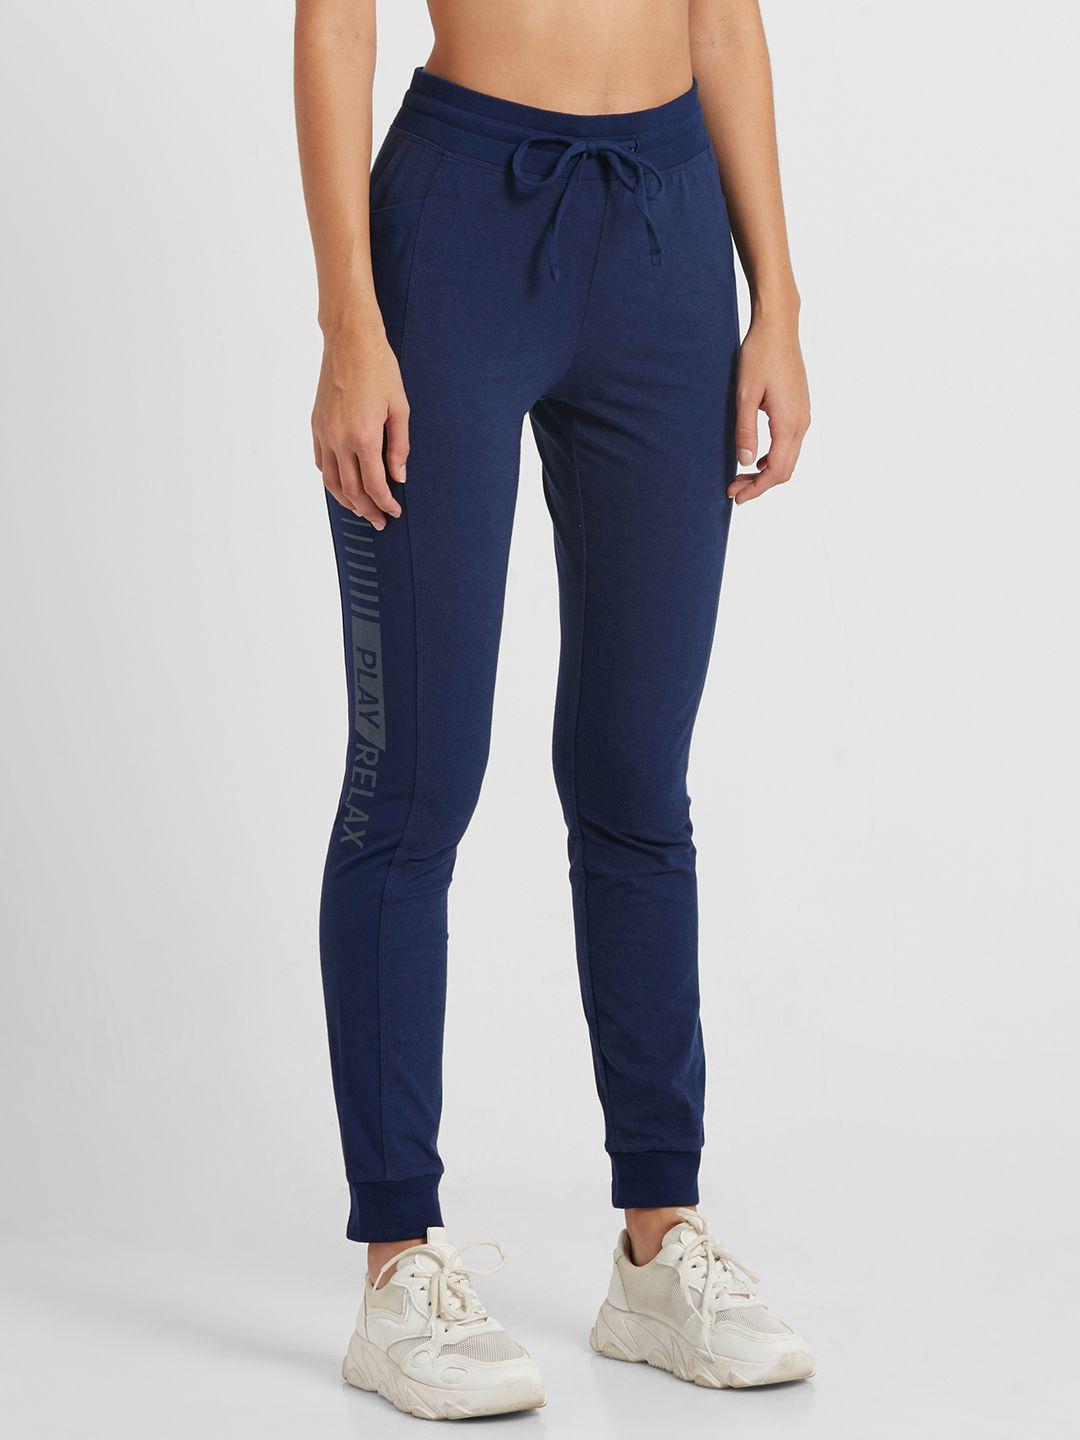 jockey athleisure women navy blue solid joggers with printed detail